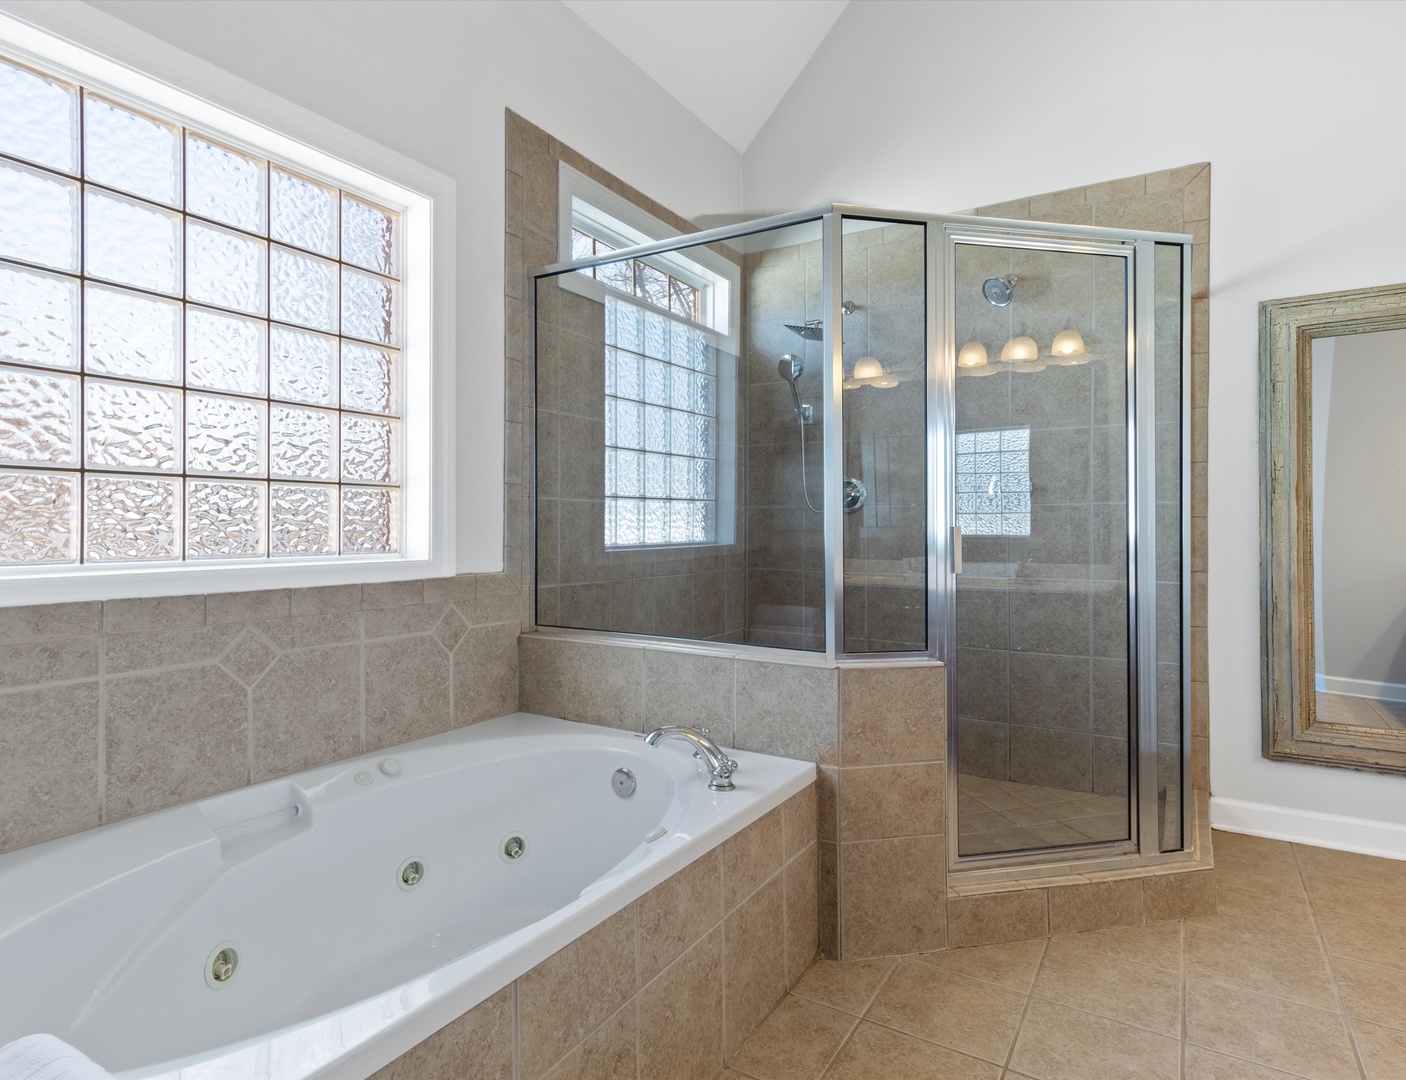 En-suite bathroom with separate shower, and tub